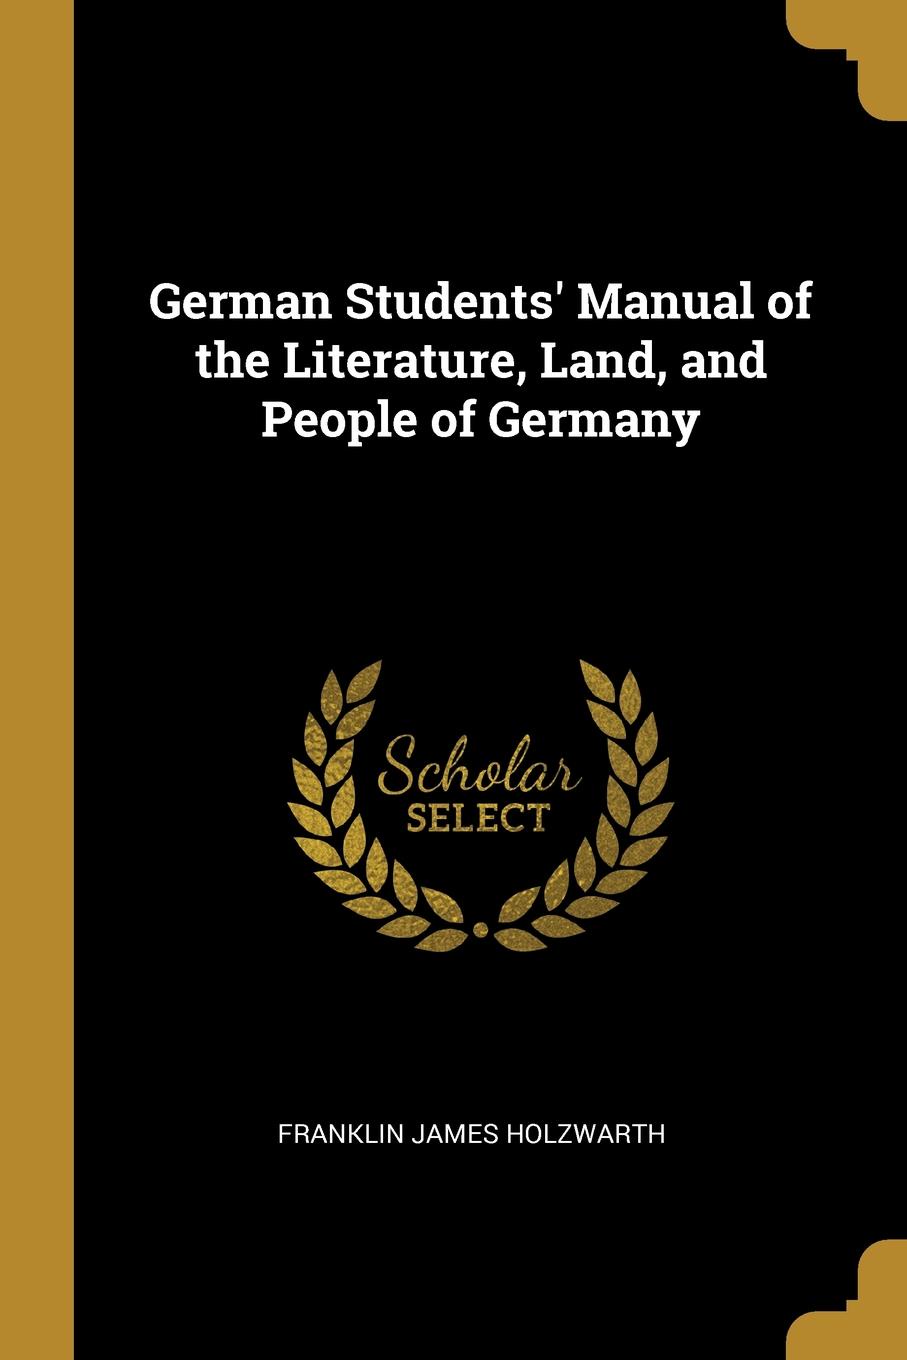 German Students. Manual of the Literature, Land, and People of Germany